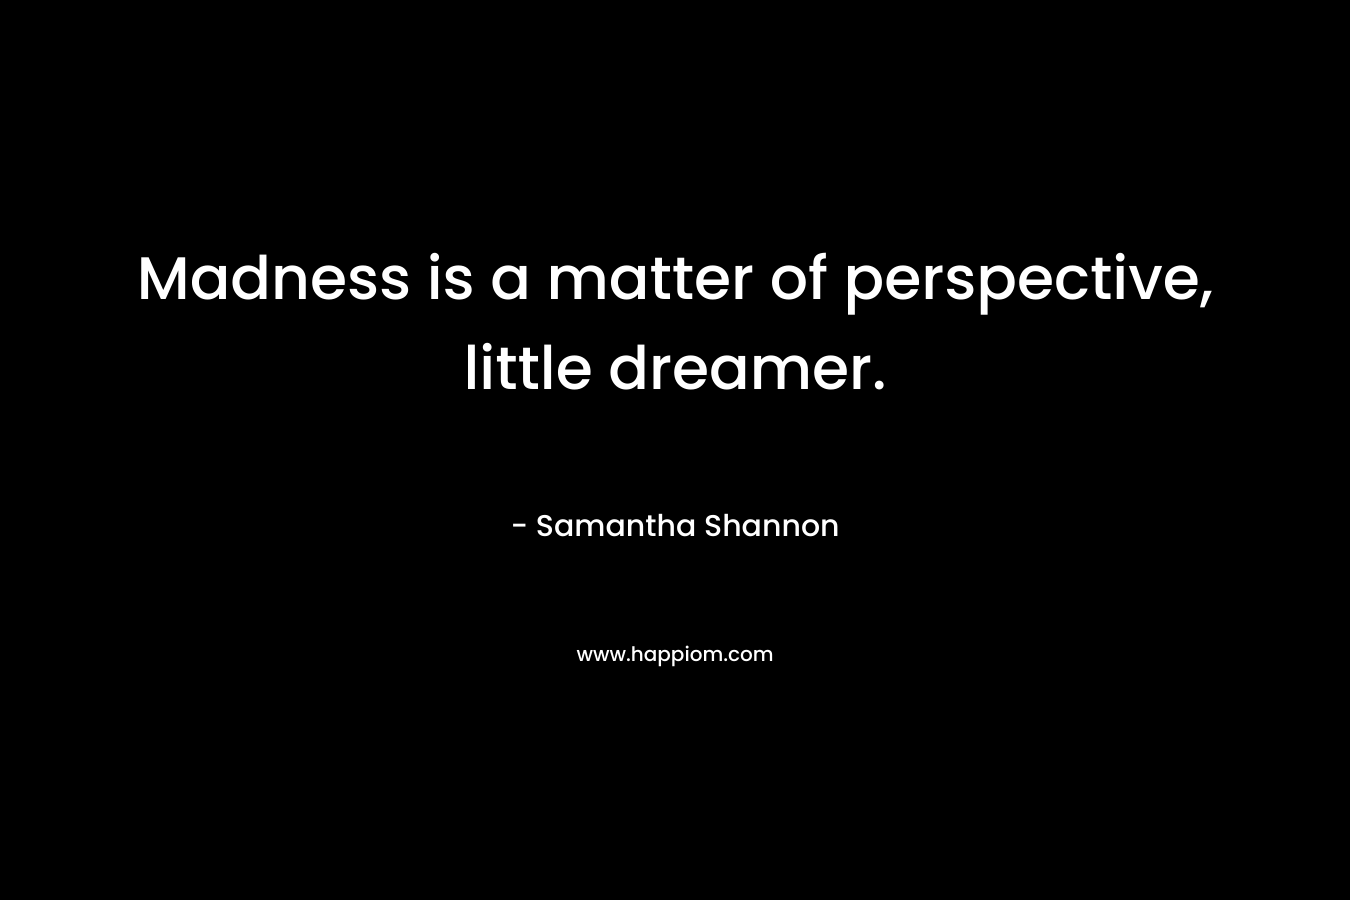 Madness is a matter of perspective, little dreamer. – Samantha Shannon